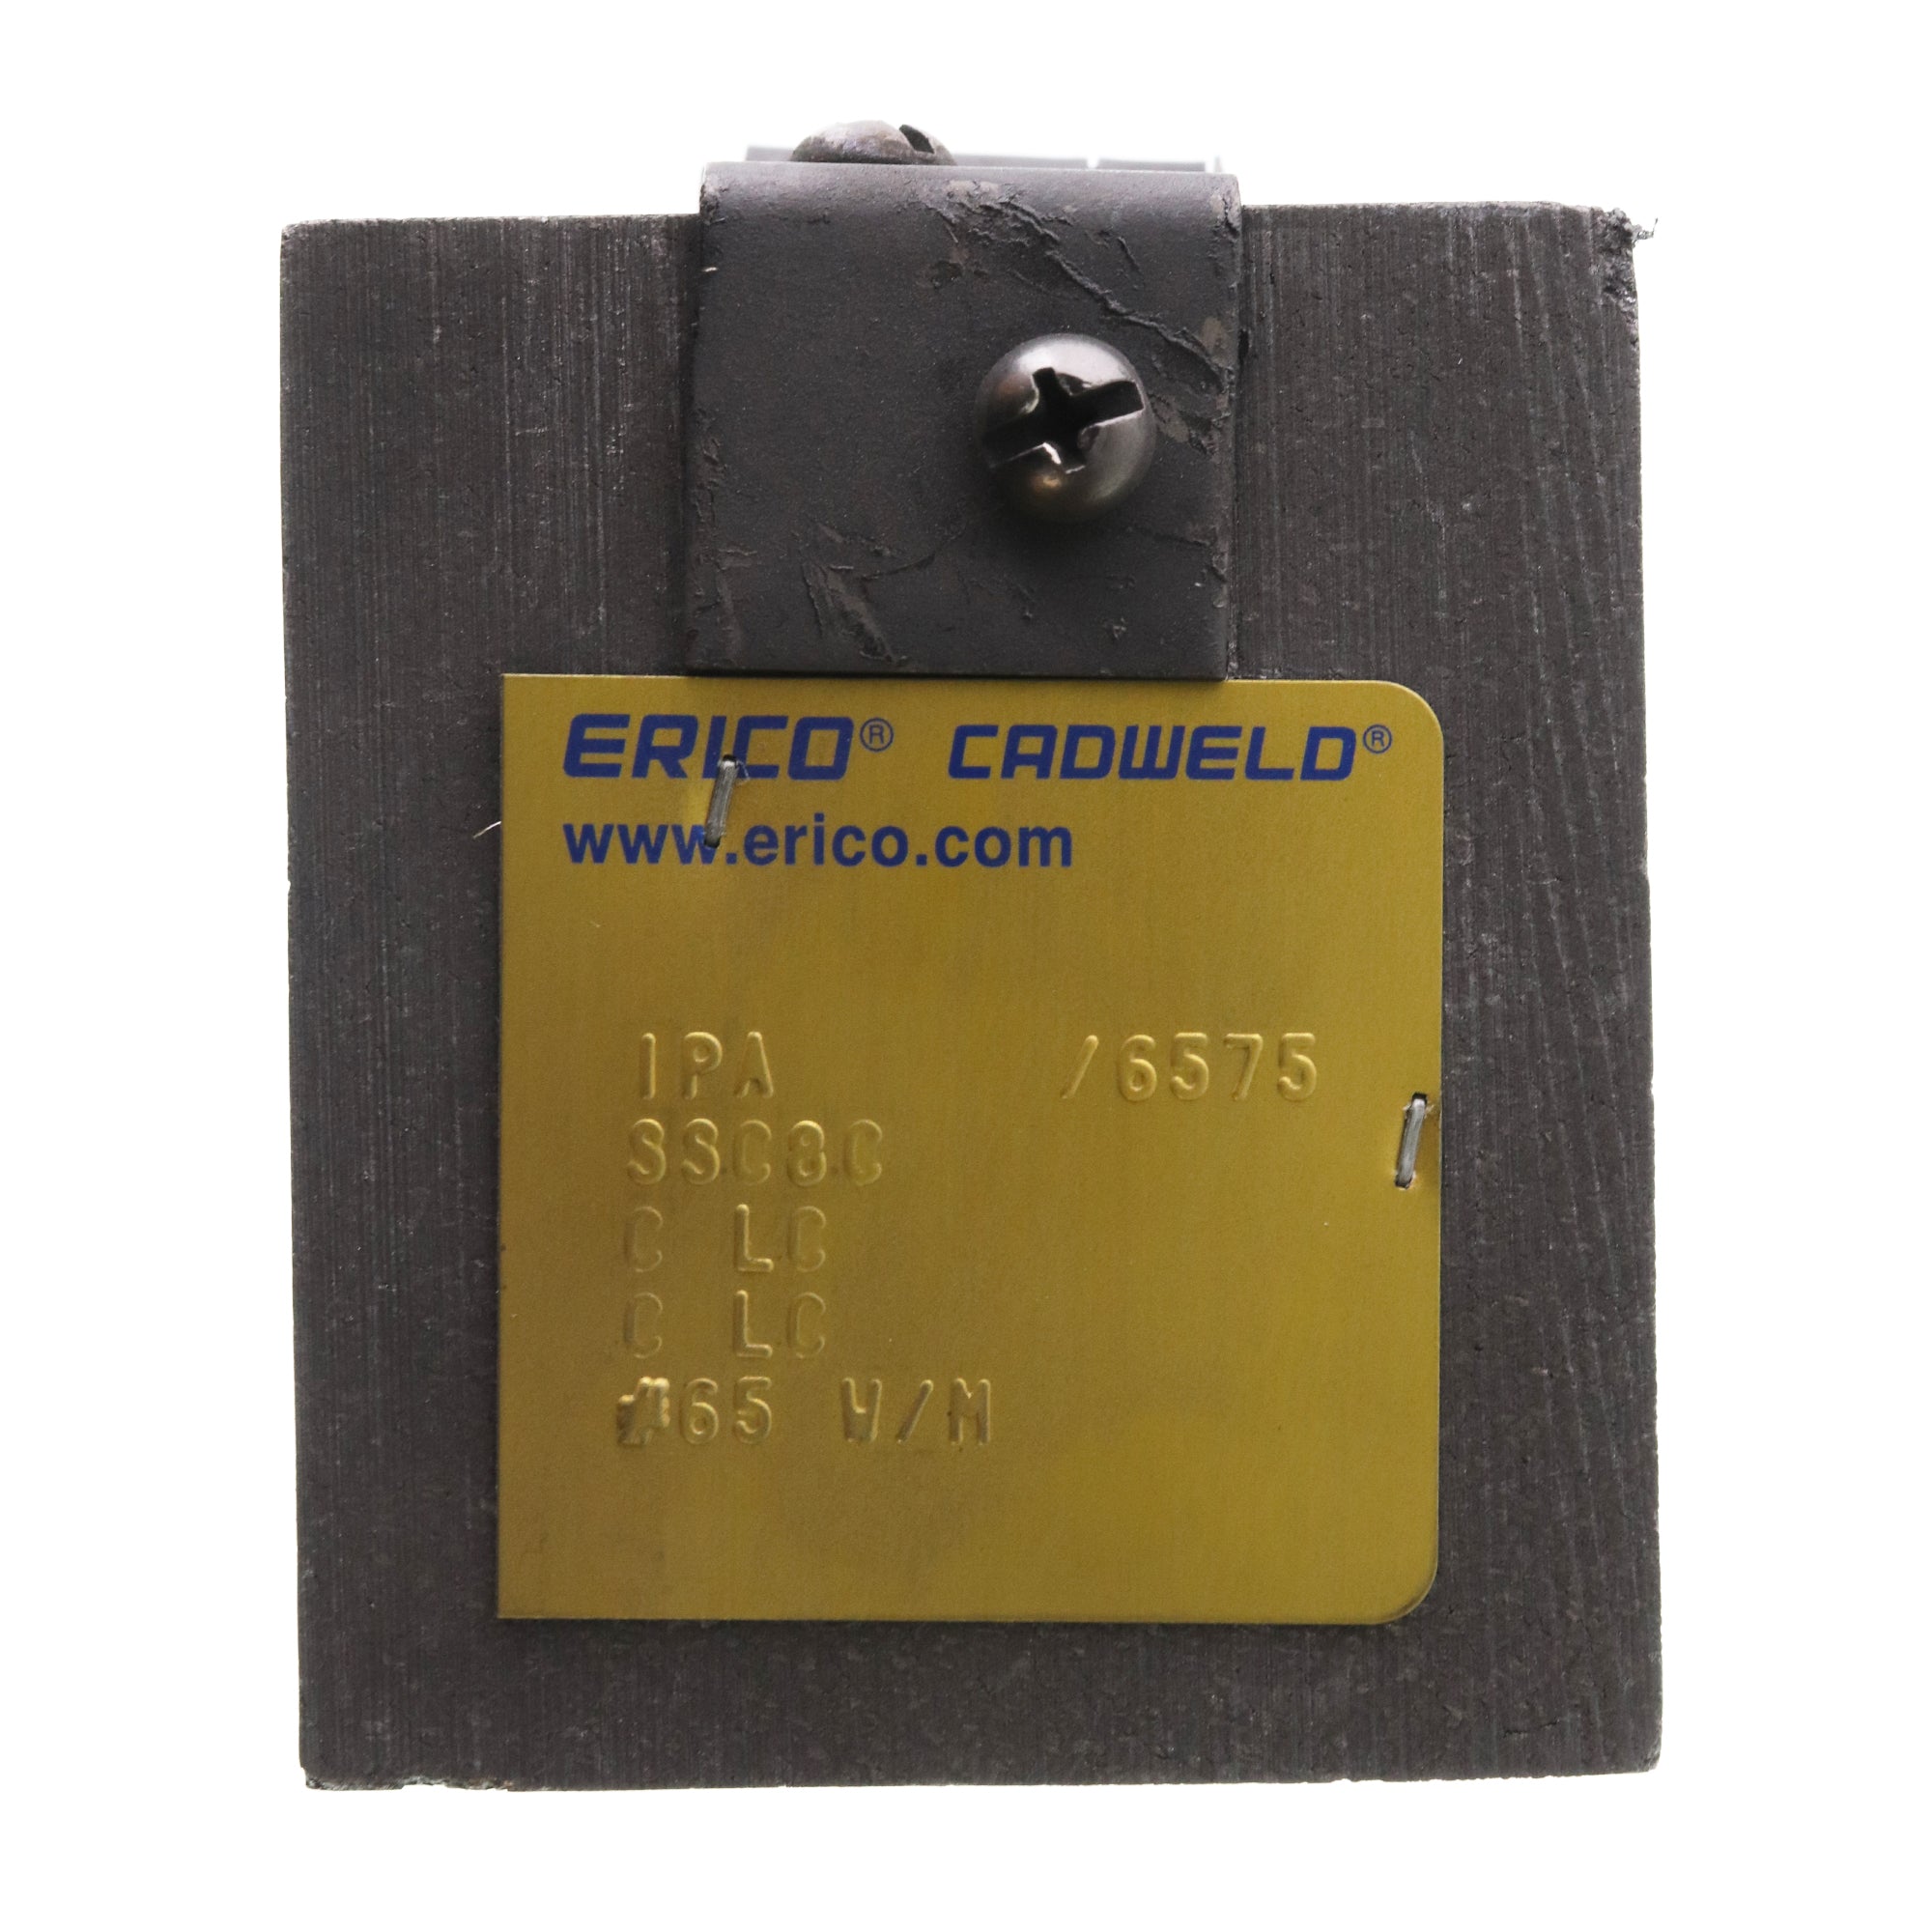 Erico Caddy Cadwal, CADWELD ERICO SSC8C .418" C-LIGHTING PROTECTION CONDUCTOR CABLE TO CABLE MOLD